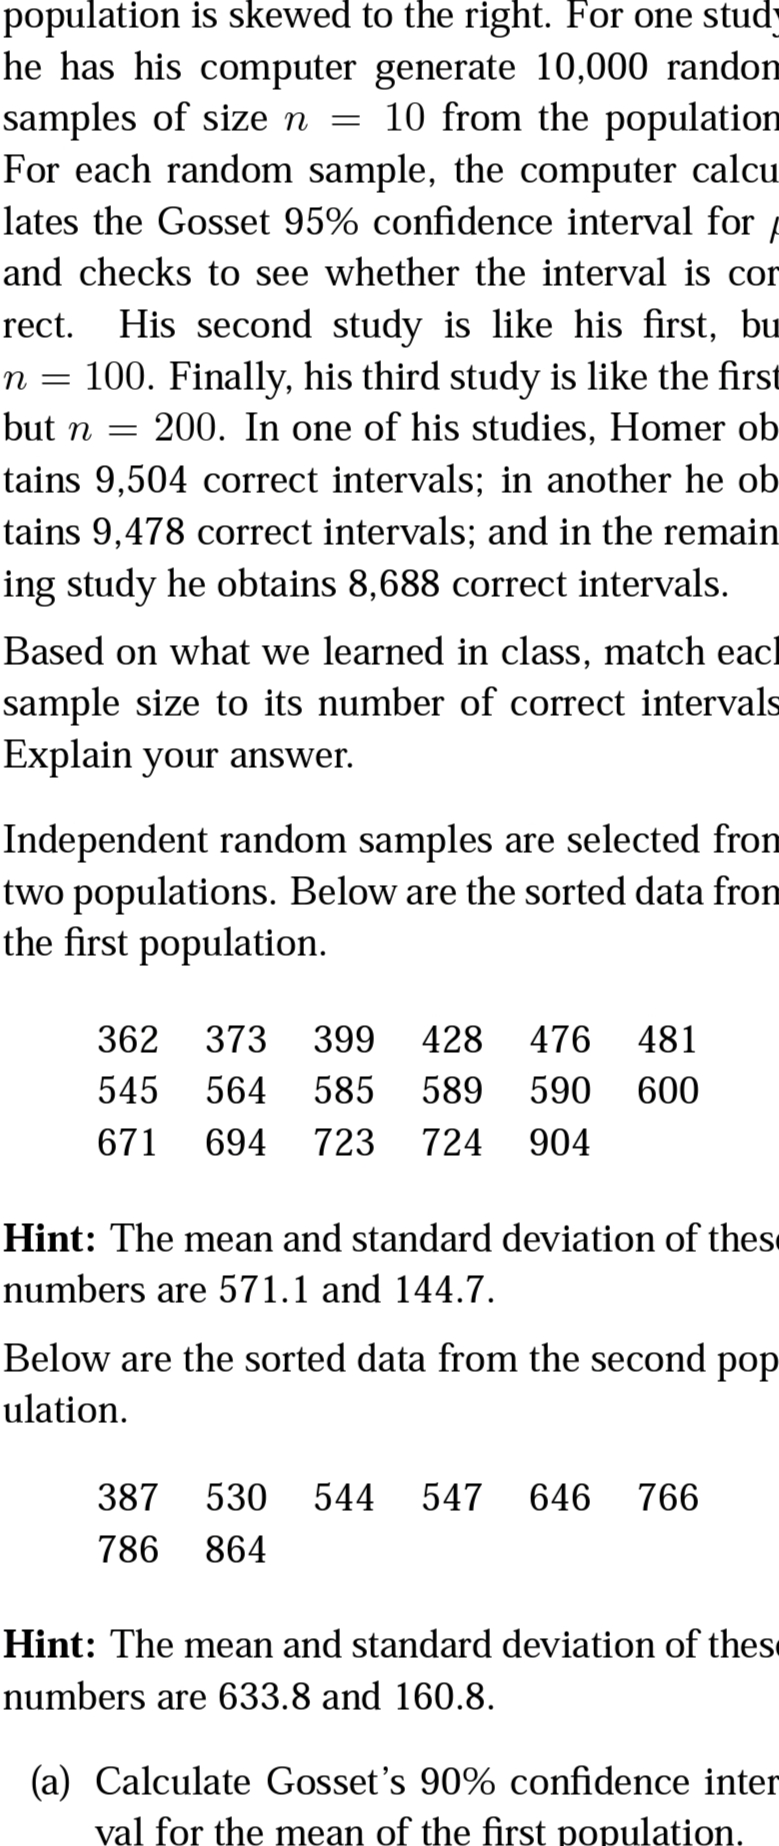 population is skewed to the right. For one study
he has his computer generate 10,000 randon
samples of size n = 10 from the population
For each random sample, the computer calcu_
lates the Gosset 95% confidence interval for /
and checks to see whether the interval is cor
His second study is like his first, bu
n = 100. Finally, his third study is like the first
200. In one of his studies, Homer ob
rect.
but n =
tains 9,504 correct intervals; in another he ob
tains 9,478 correct intervals; and in the remain
ing study he obtains 8,688 correct intervals.
Based on what we learned in class, match eacl
sample size to its number of correct intervals
Explain your answer.
Independent random samples are selected fron
two populations. Below are the sorted data from
the first population.
362
373
399
428
476
481
545
564
585
589
590
600
671
694
723
724
904
Hint: The mean and standard deviation of these
numbers are 571.1 and 144.7.
Below are the sorted data from the second pop
ulation.
387
530 544
547
646
766
786
864
Hint: The mean and standard deviation of these
numbers are 633.8 and 160.8.
(a) Calculate Gosset's 90% confidence inter
val for the mean of the first population.
